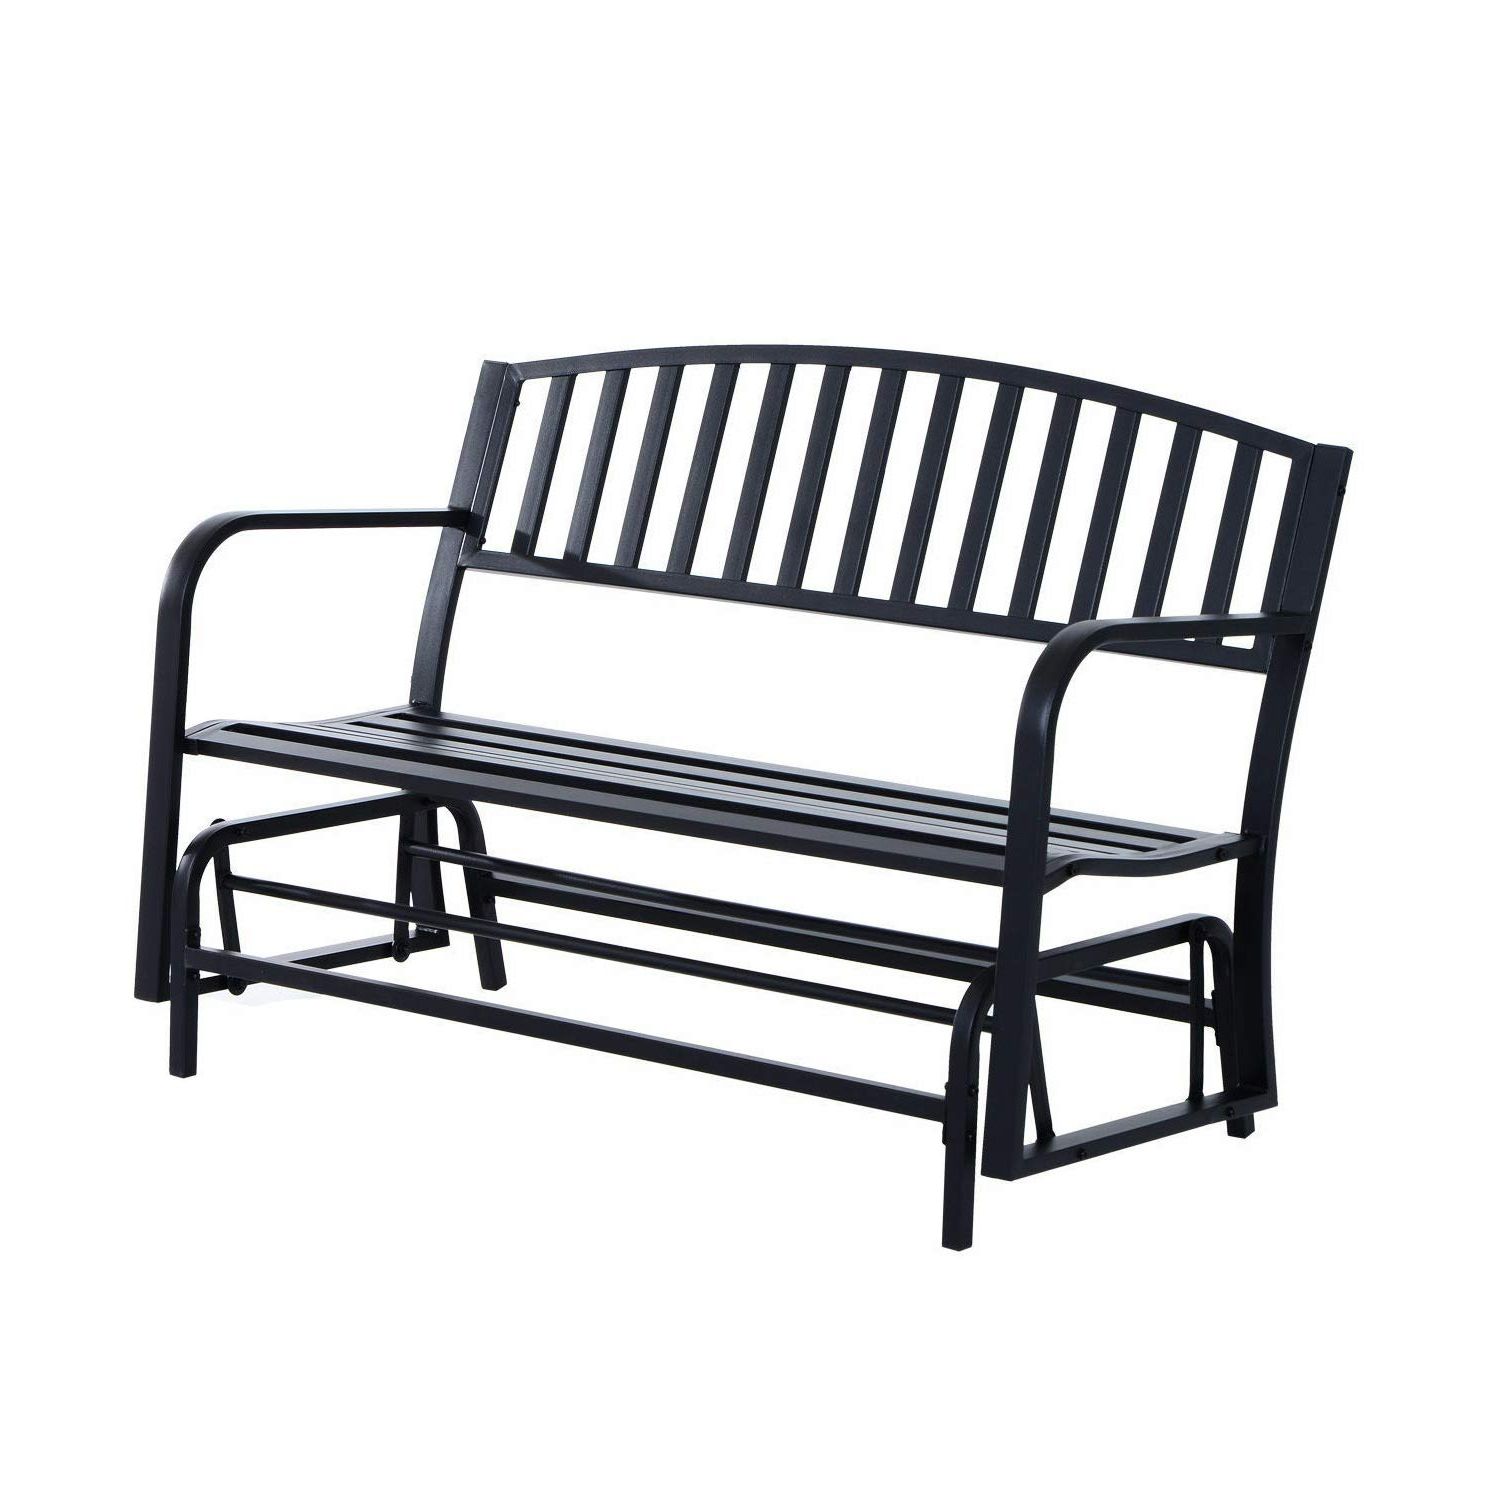 Newest Amazon : Black Patio Swing Glider Bench For 2 Persons Regarding 2 Person Black Wood Outdoor Swings (View 3 of 30)